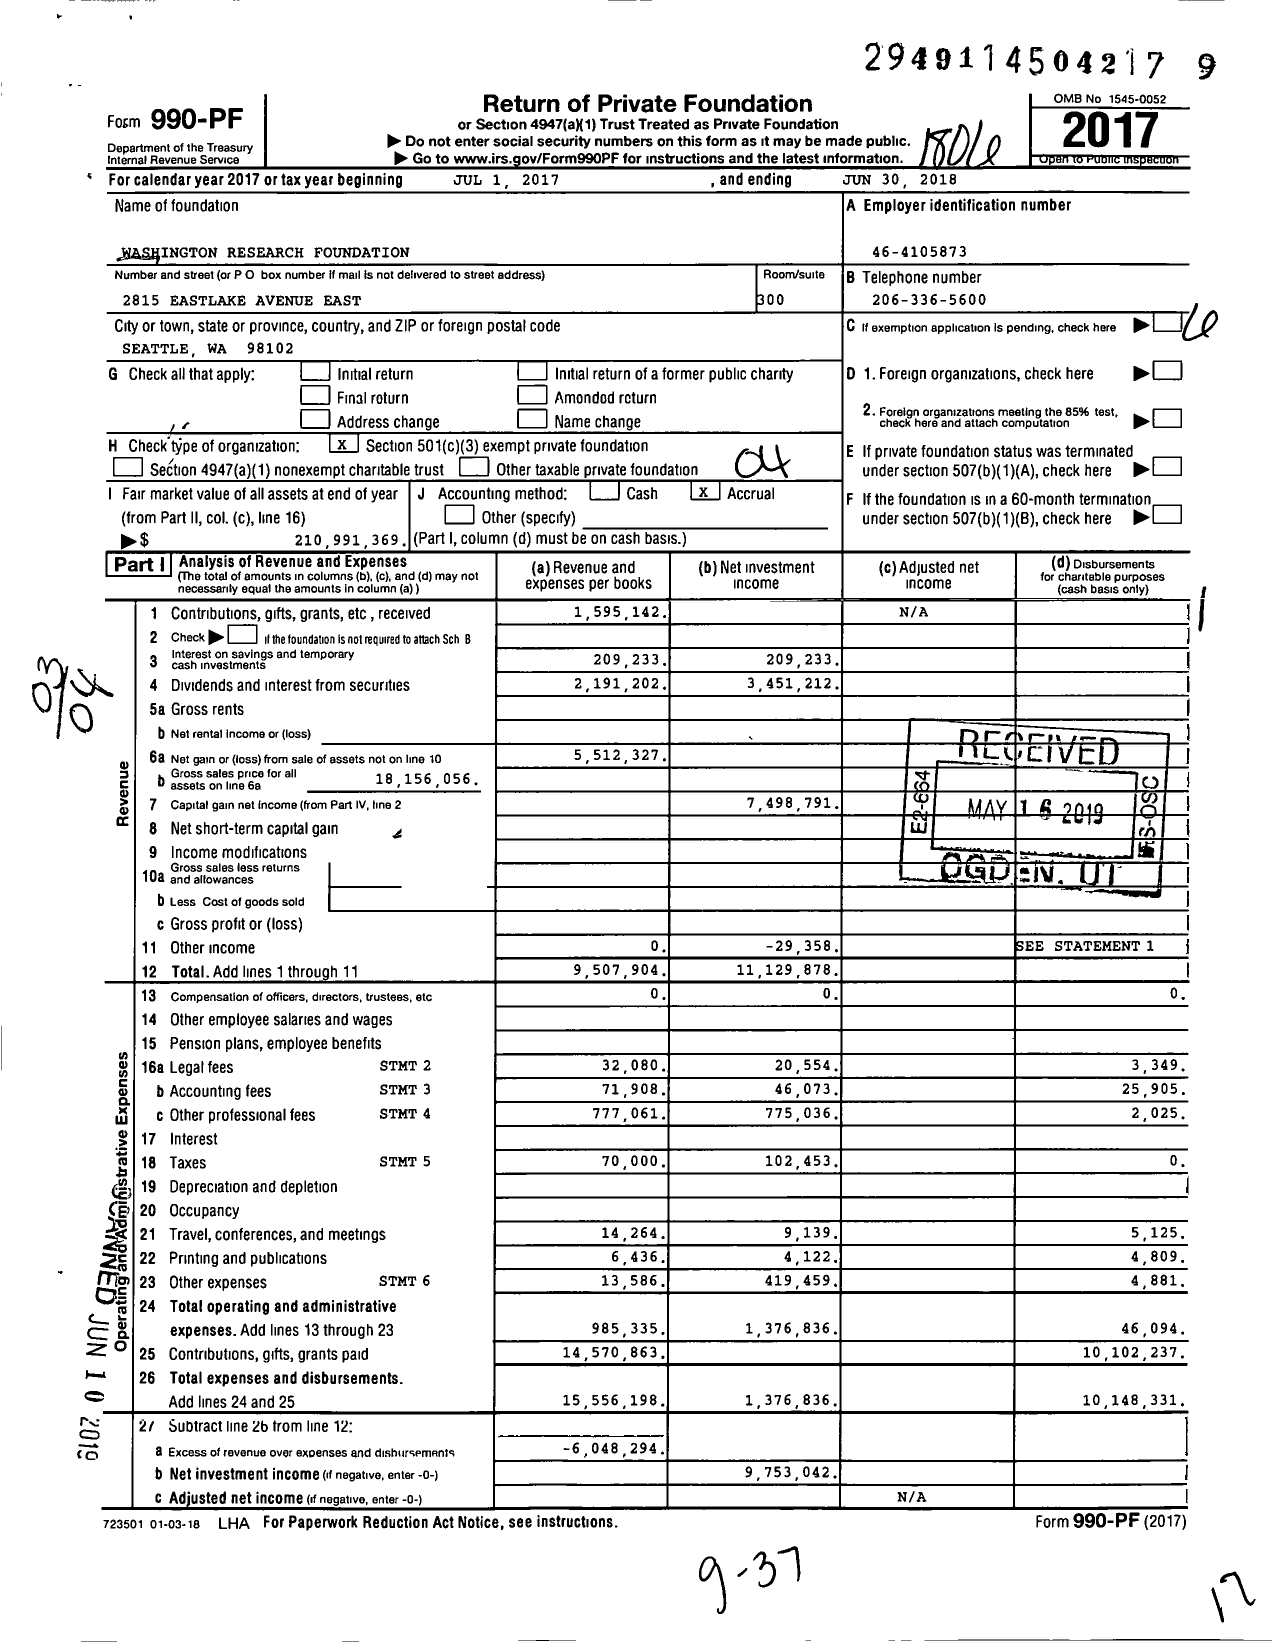 Image of first page of 2017 Form 990PF for Washington Research Foundation